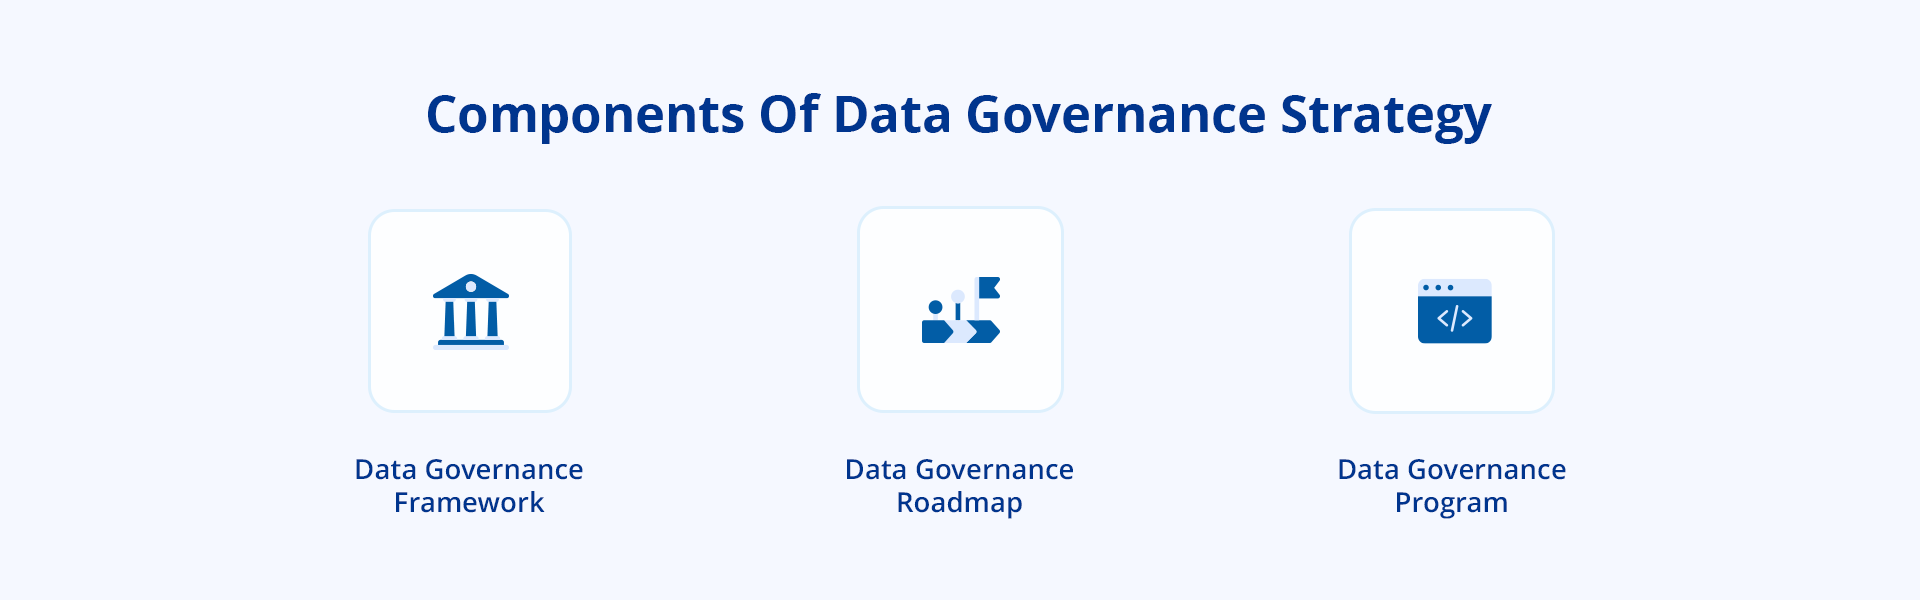 Components of a data governance strategy 